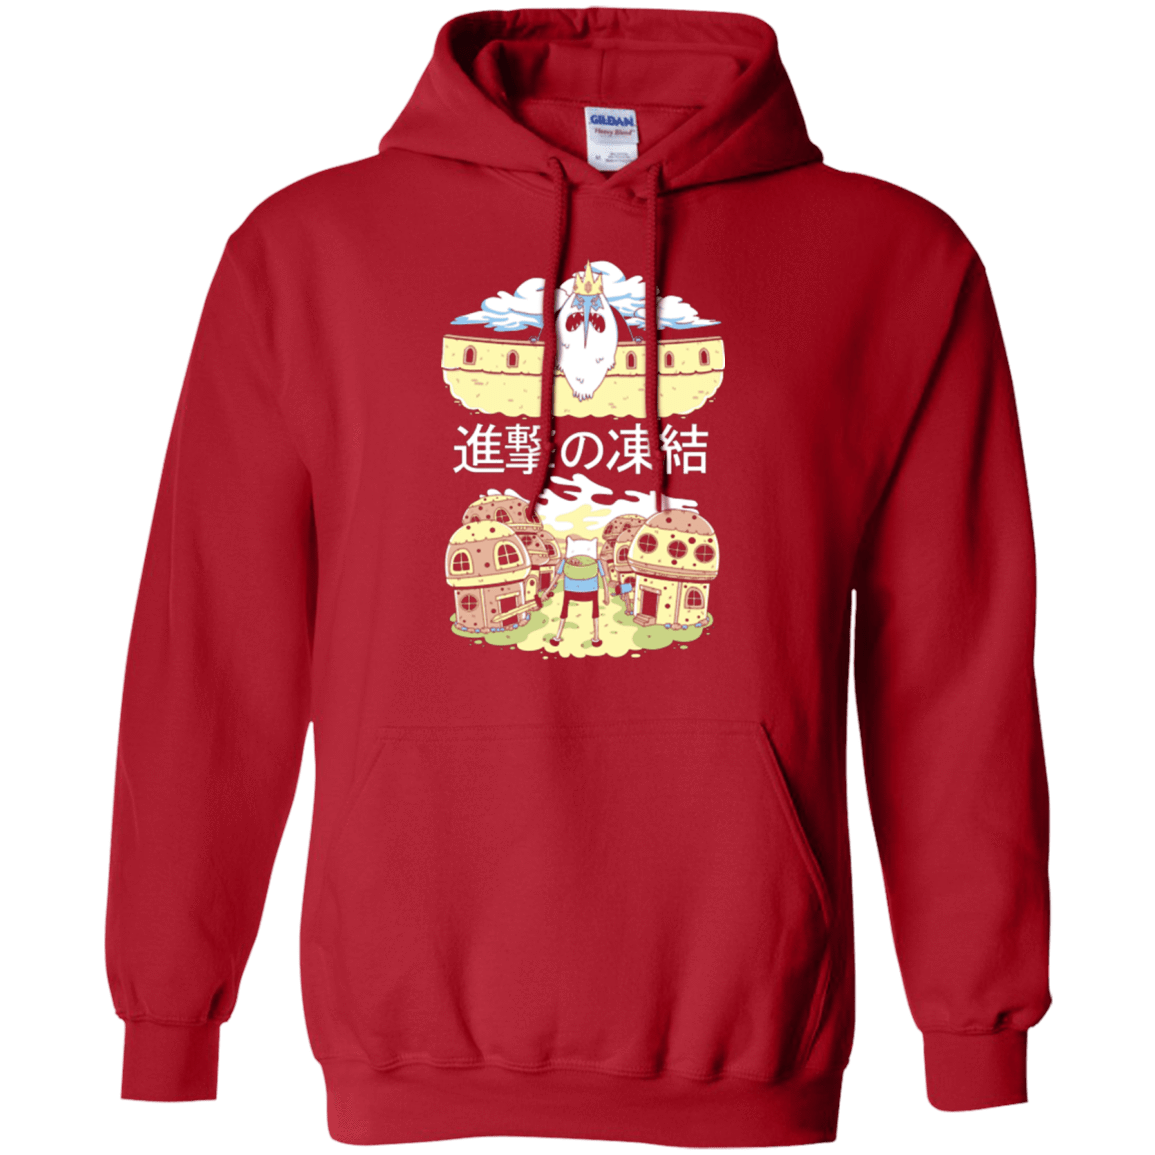 Sweatshirts Red / Small Attack on Freeze Pullover Hoodie